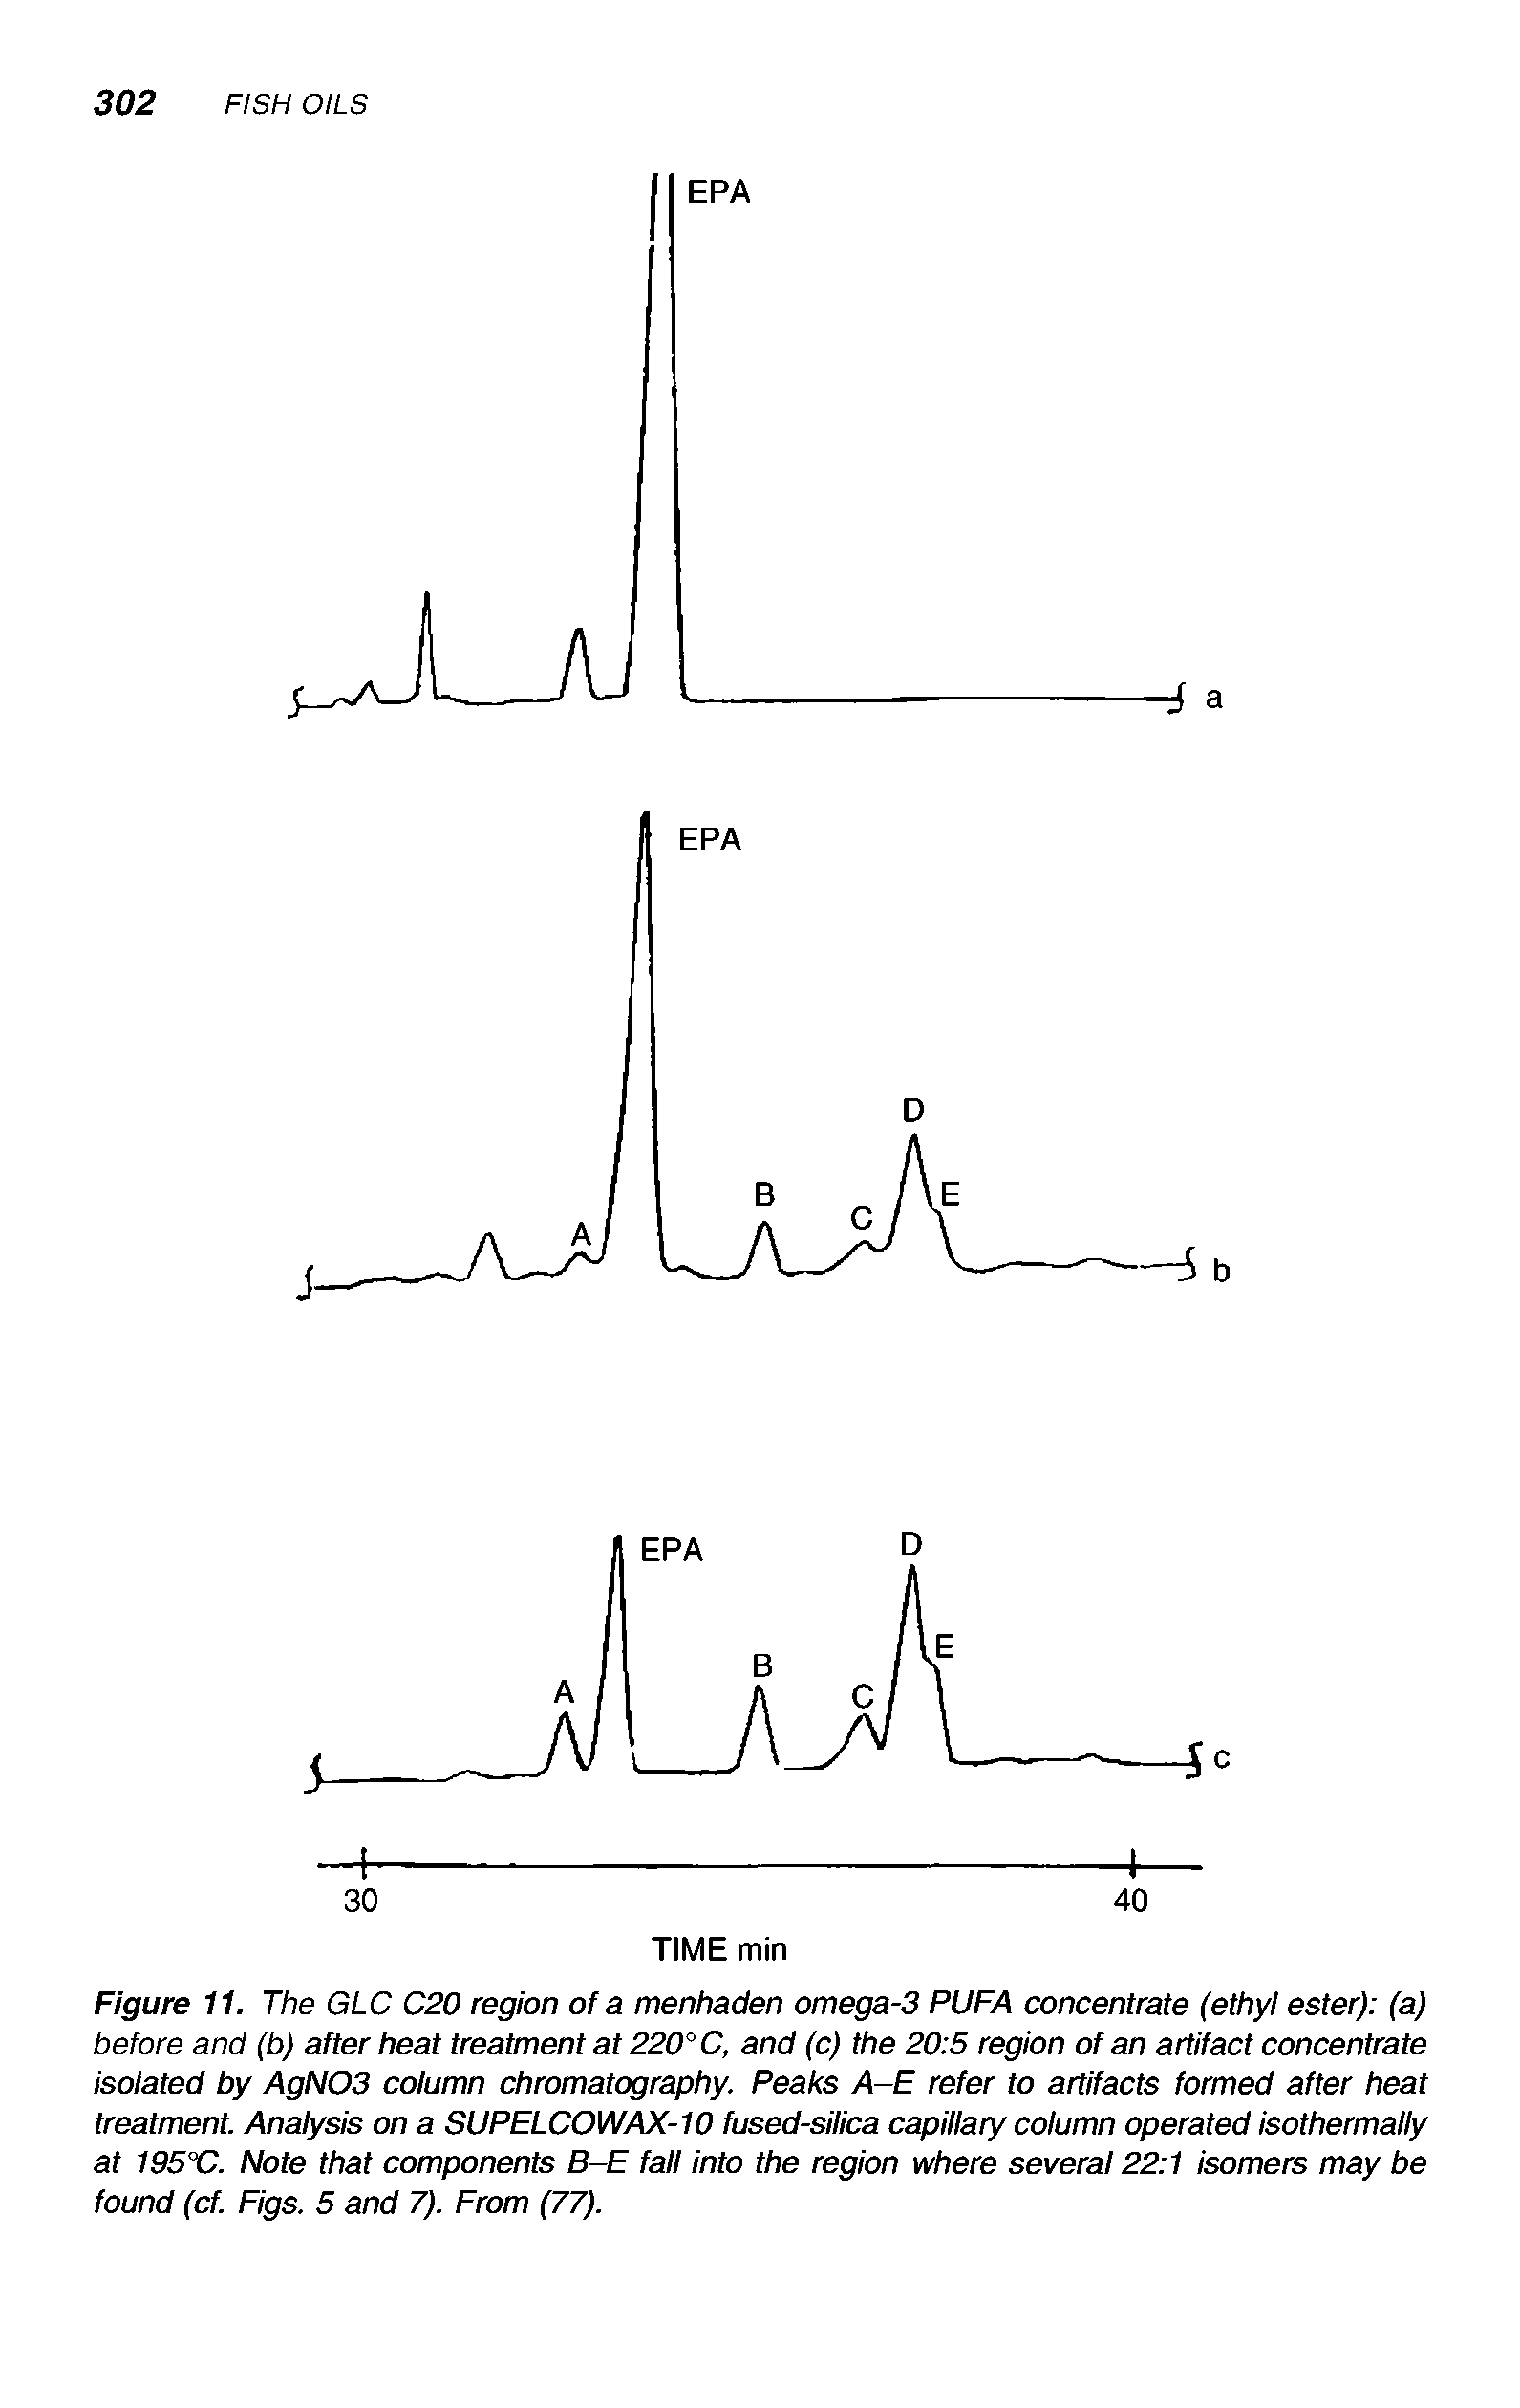 Figure 11. The GLC C20 region of a menhaden omega-3 PUFA concentrate (ethyl ester) (a) before and (b) after heat treatment at 220° C, and (c) the 20 5 region of an artifact concentrate isolated by AgN03 column chromatography. Peaks A-E refer to artifacts formed after heat treatment. Analysis on a SUPELCOWAX-10 fused-silica capillary column operated isothermally at 195X1. Note that components B-E fall into the region where several 22 1 isomers may be found (cf. Figs. 5 and 7). From (77).